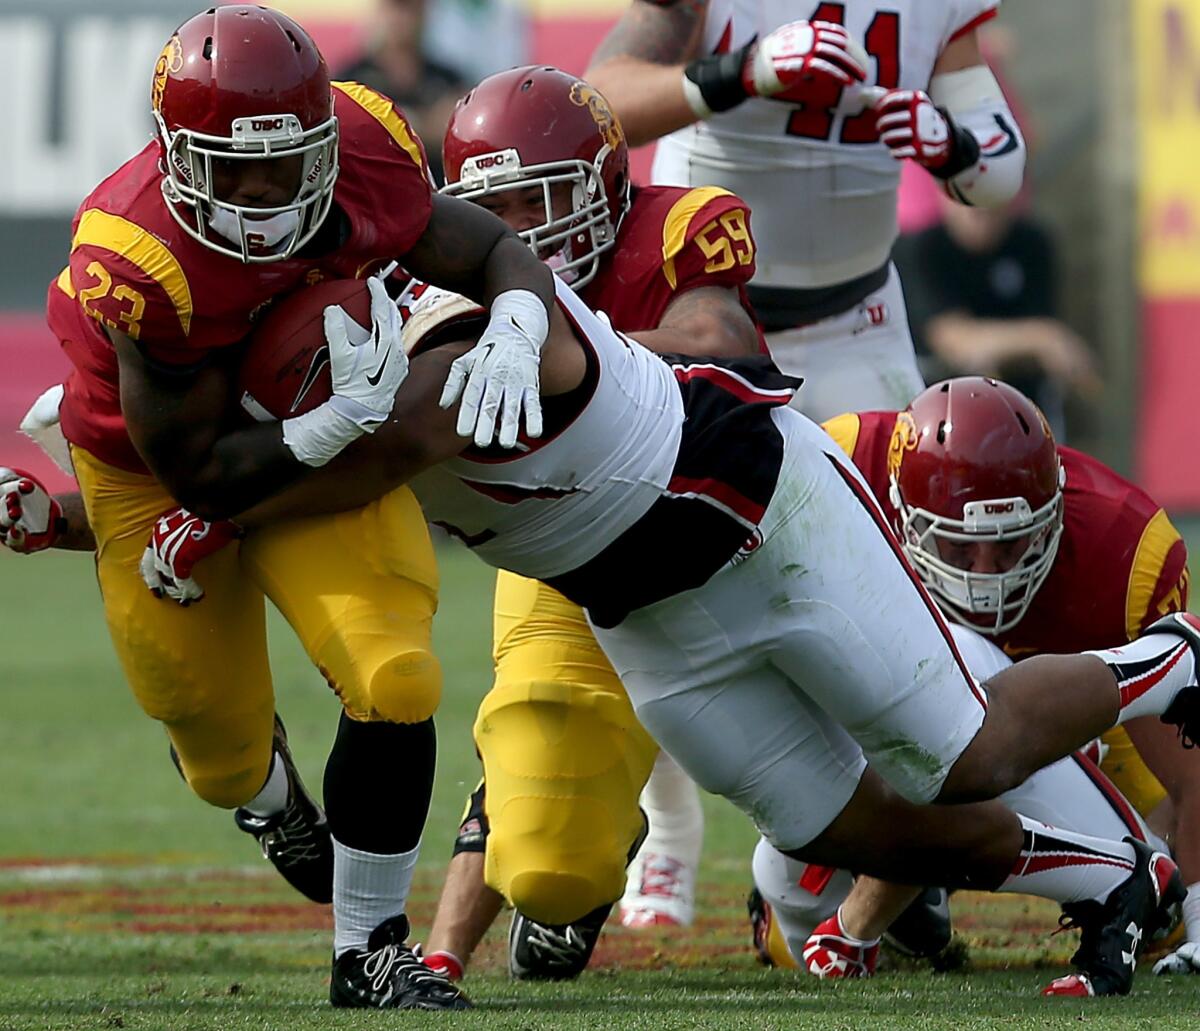 USC running back Tre Madden fights for extra yardage against Utah last season. Madden has not played this season because of a toe injury.